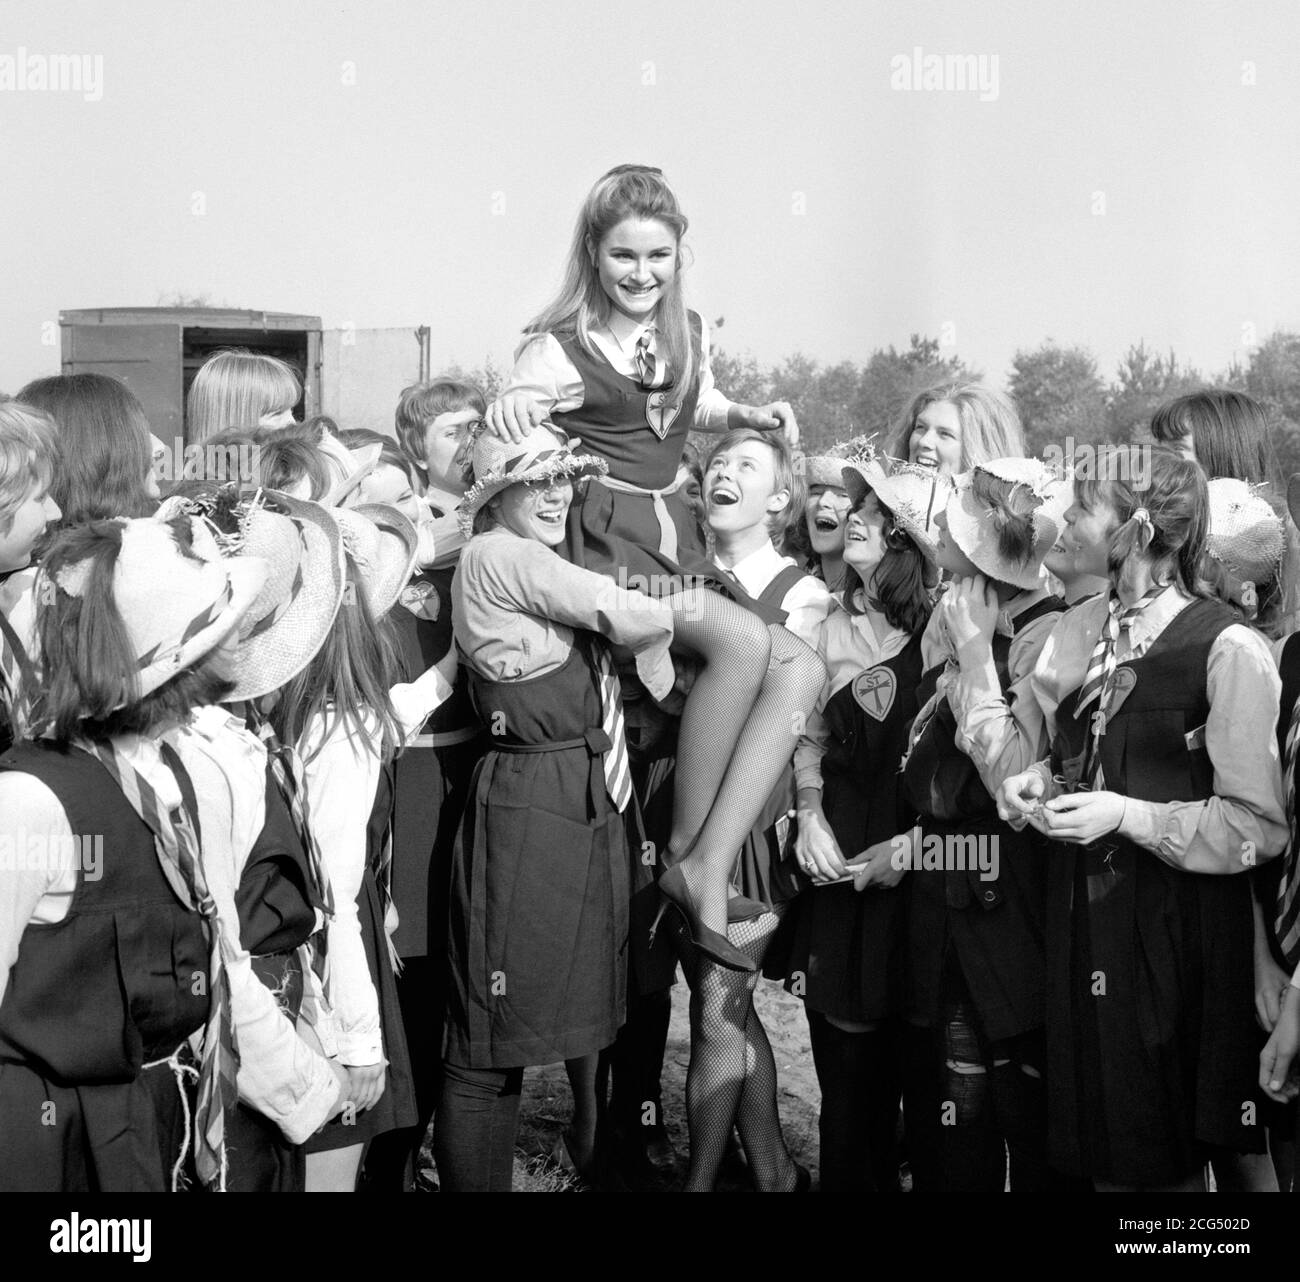 Portland Mason, daughter of film actor James Mason, during location filming at Longmoor Army Camp, Hampshire, for 'The Great St Trinian's Train Robbery', based on the dreadful girls school created in the books by the renowned cartoonist, Ronald Searle. Stock Photo